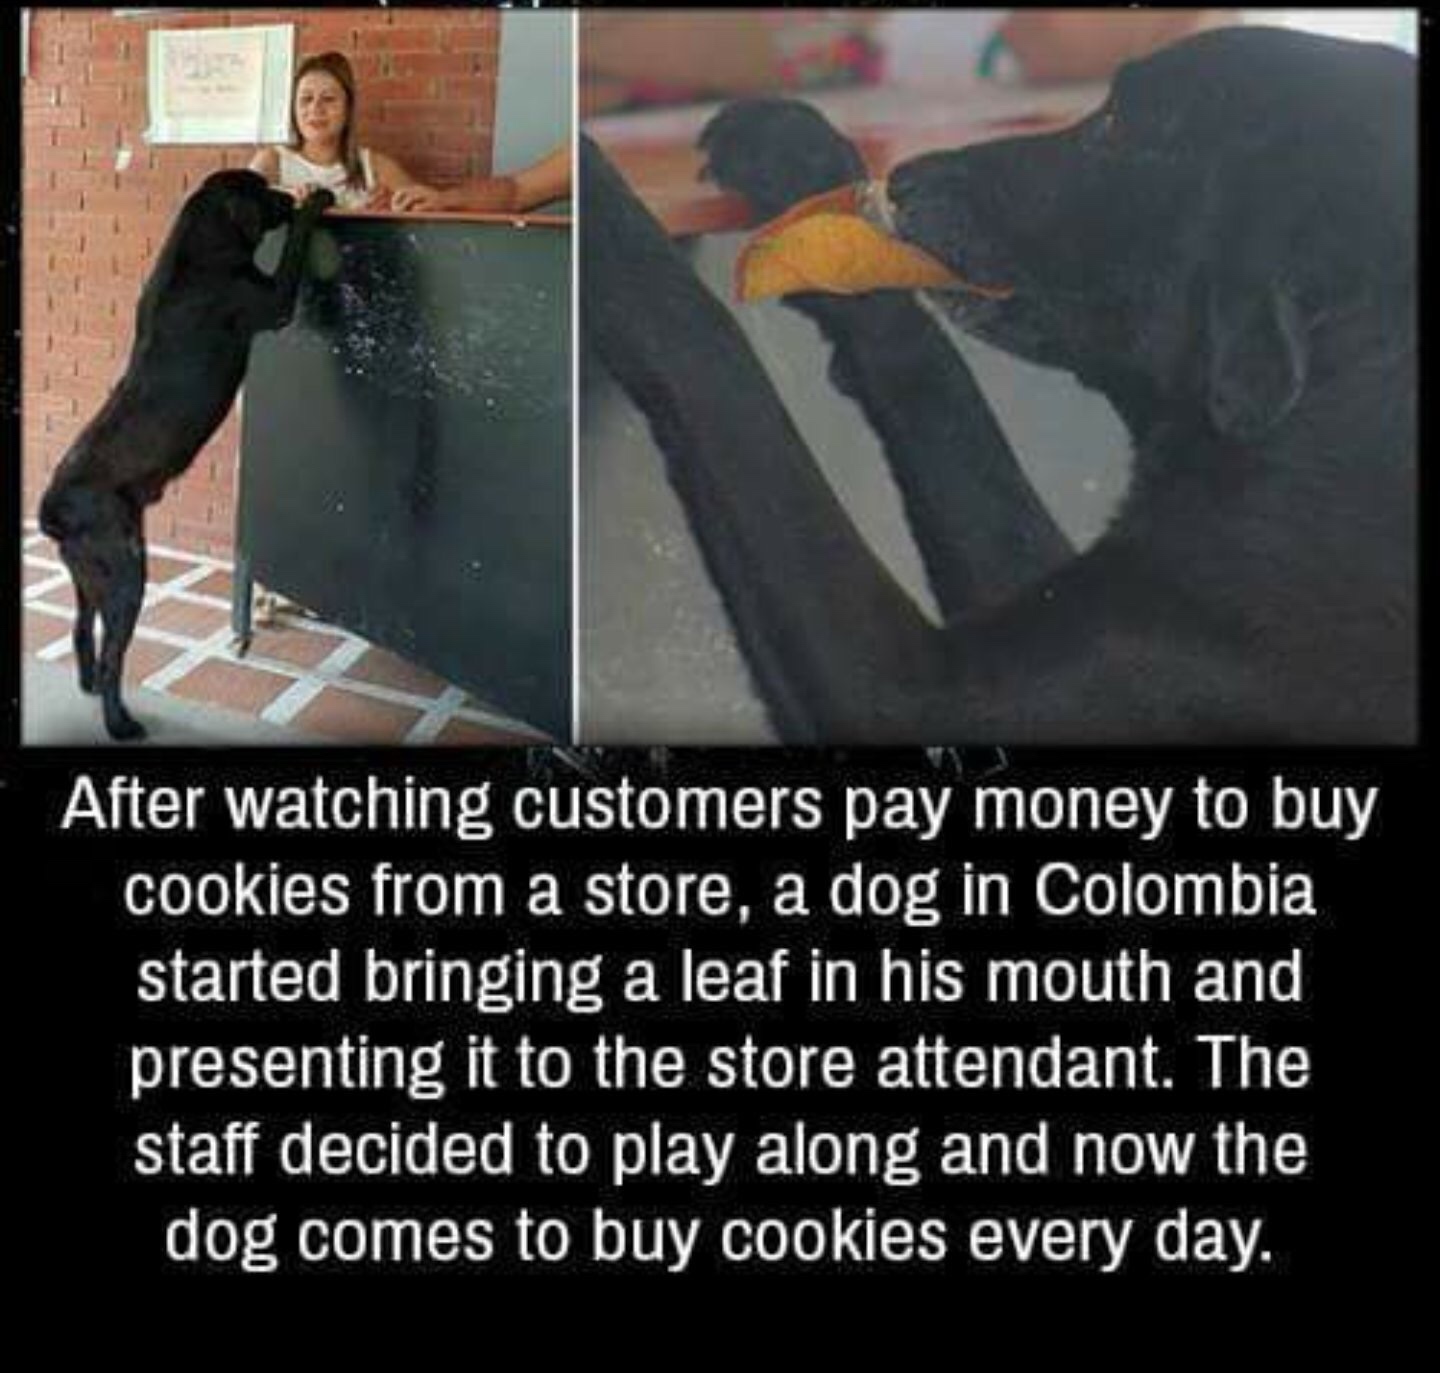 dog brings leaf for cookie - After watching customers pay money to buy cookies from a store, a dog in Colombia started bringing a leaf in his mouth and presenting it to the store attendant. The staff decided to play along and now the dog comes to buy cook